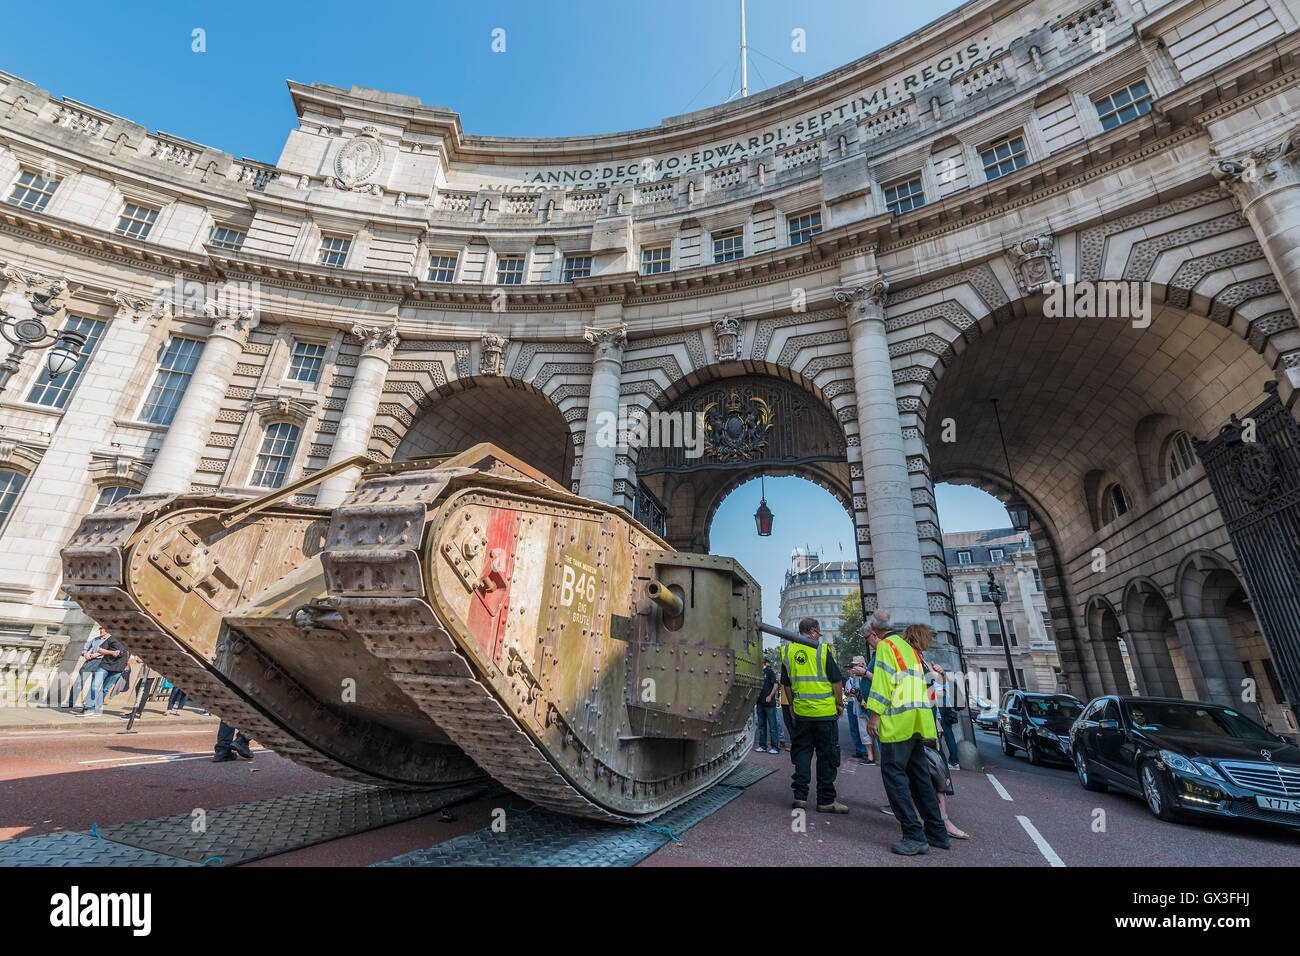 London, UK. 15th September, 2016. The tank is guided through admiralty arch - A replica of a World War One tank brought to London to mark the 100th anniversary its first use in action in the Battle of the Somme on 15 September 1916. Dorset's Tank Museum, provided the machine which was designed to travel at walking pace (3mph) to support the infantry. Credit:  Guy Bell/Alamy Live News Stock Photo